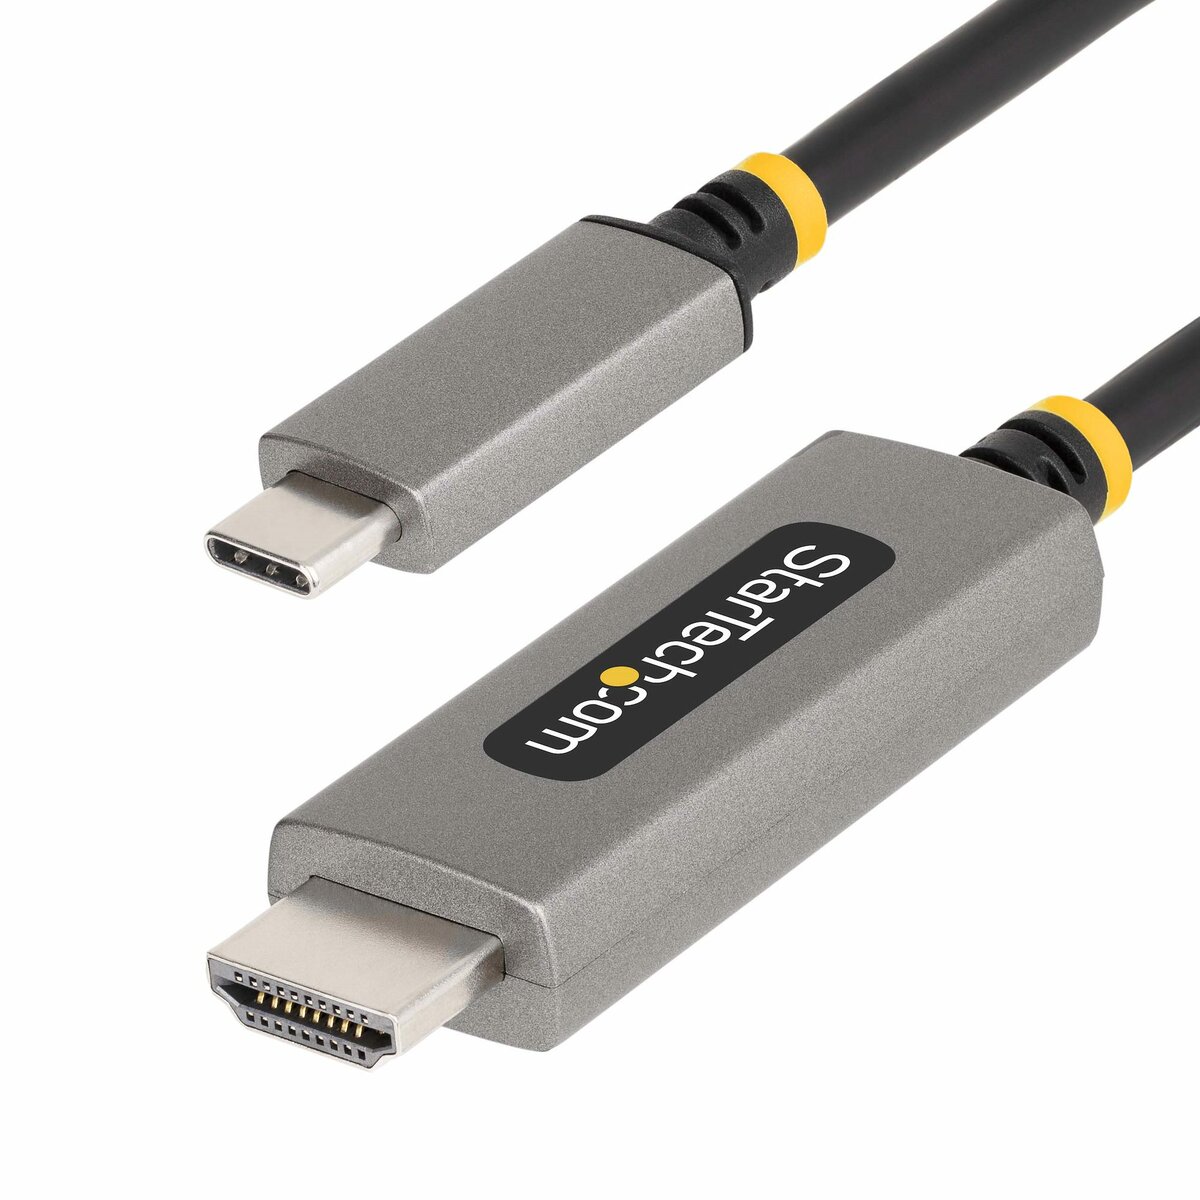 6ft USB 3.1 Type C Male to HDMI (4K @ 60Hz) Male Cable, Black